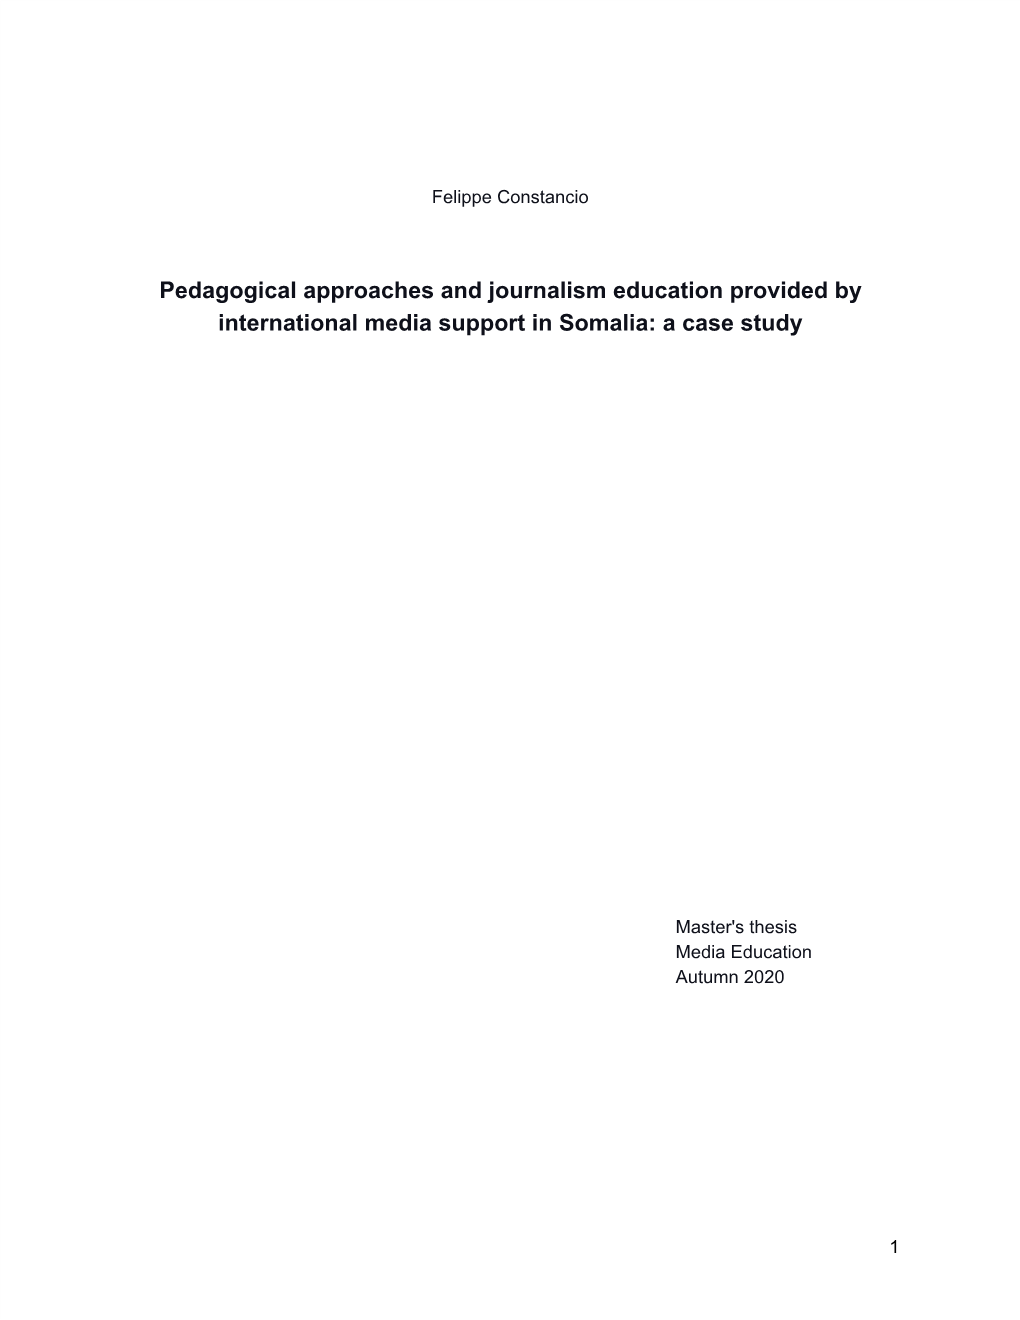 Pedagogical Approaches and Journalism Education Provided by International Media Support in Somalia: a Case Study